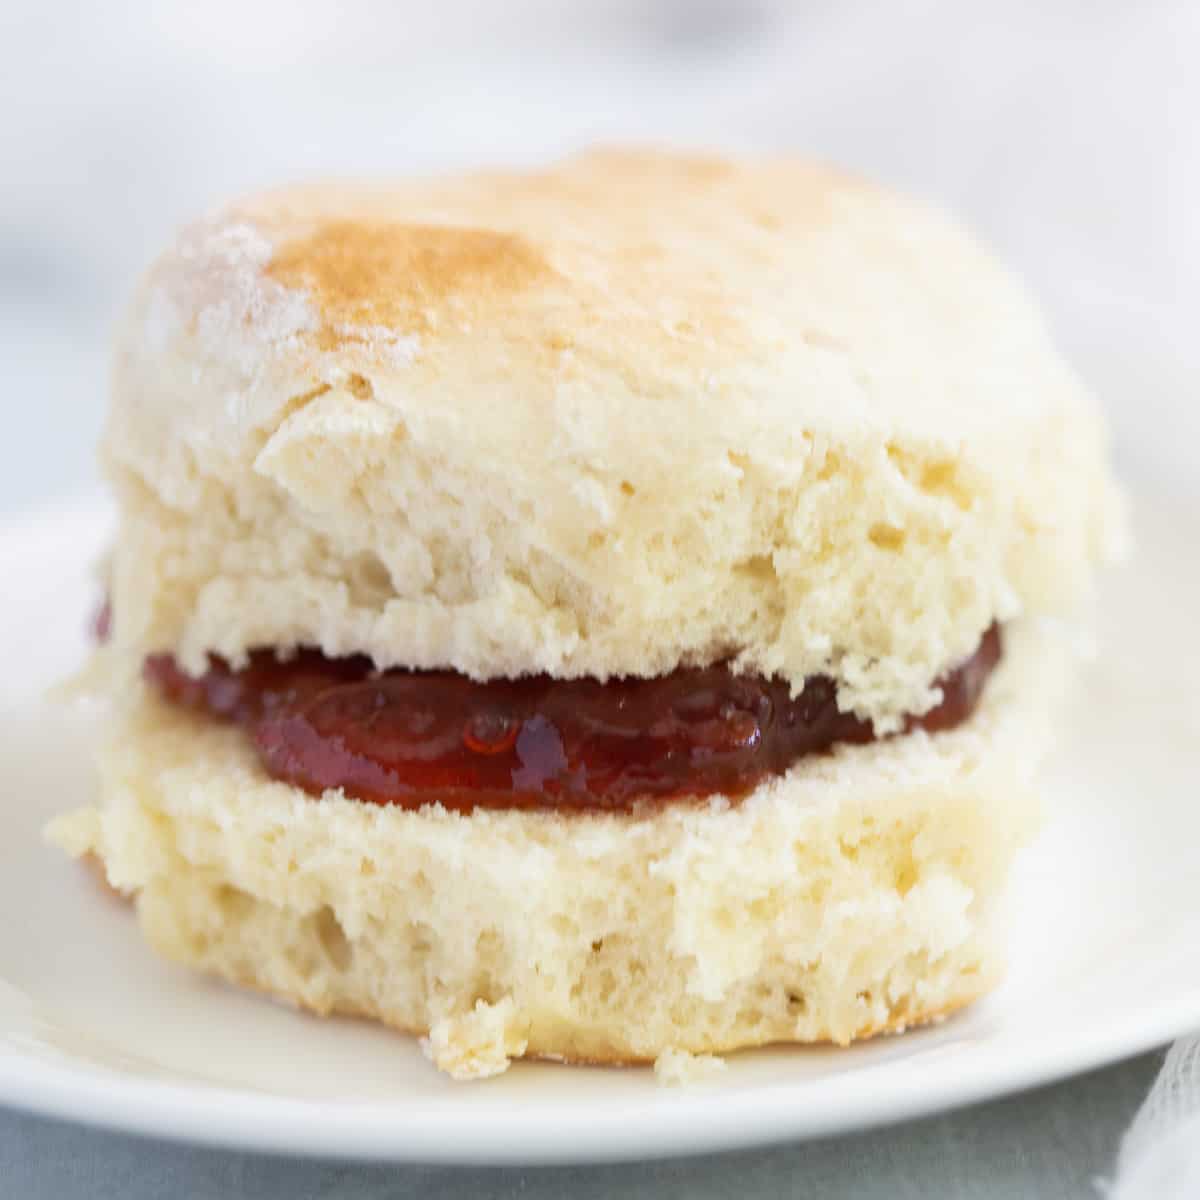 Scone on plate filled with strawberry jam.